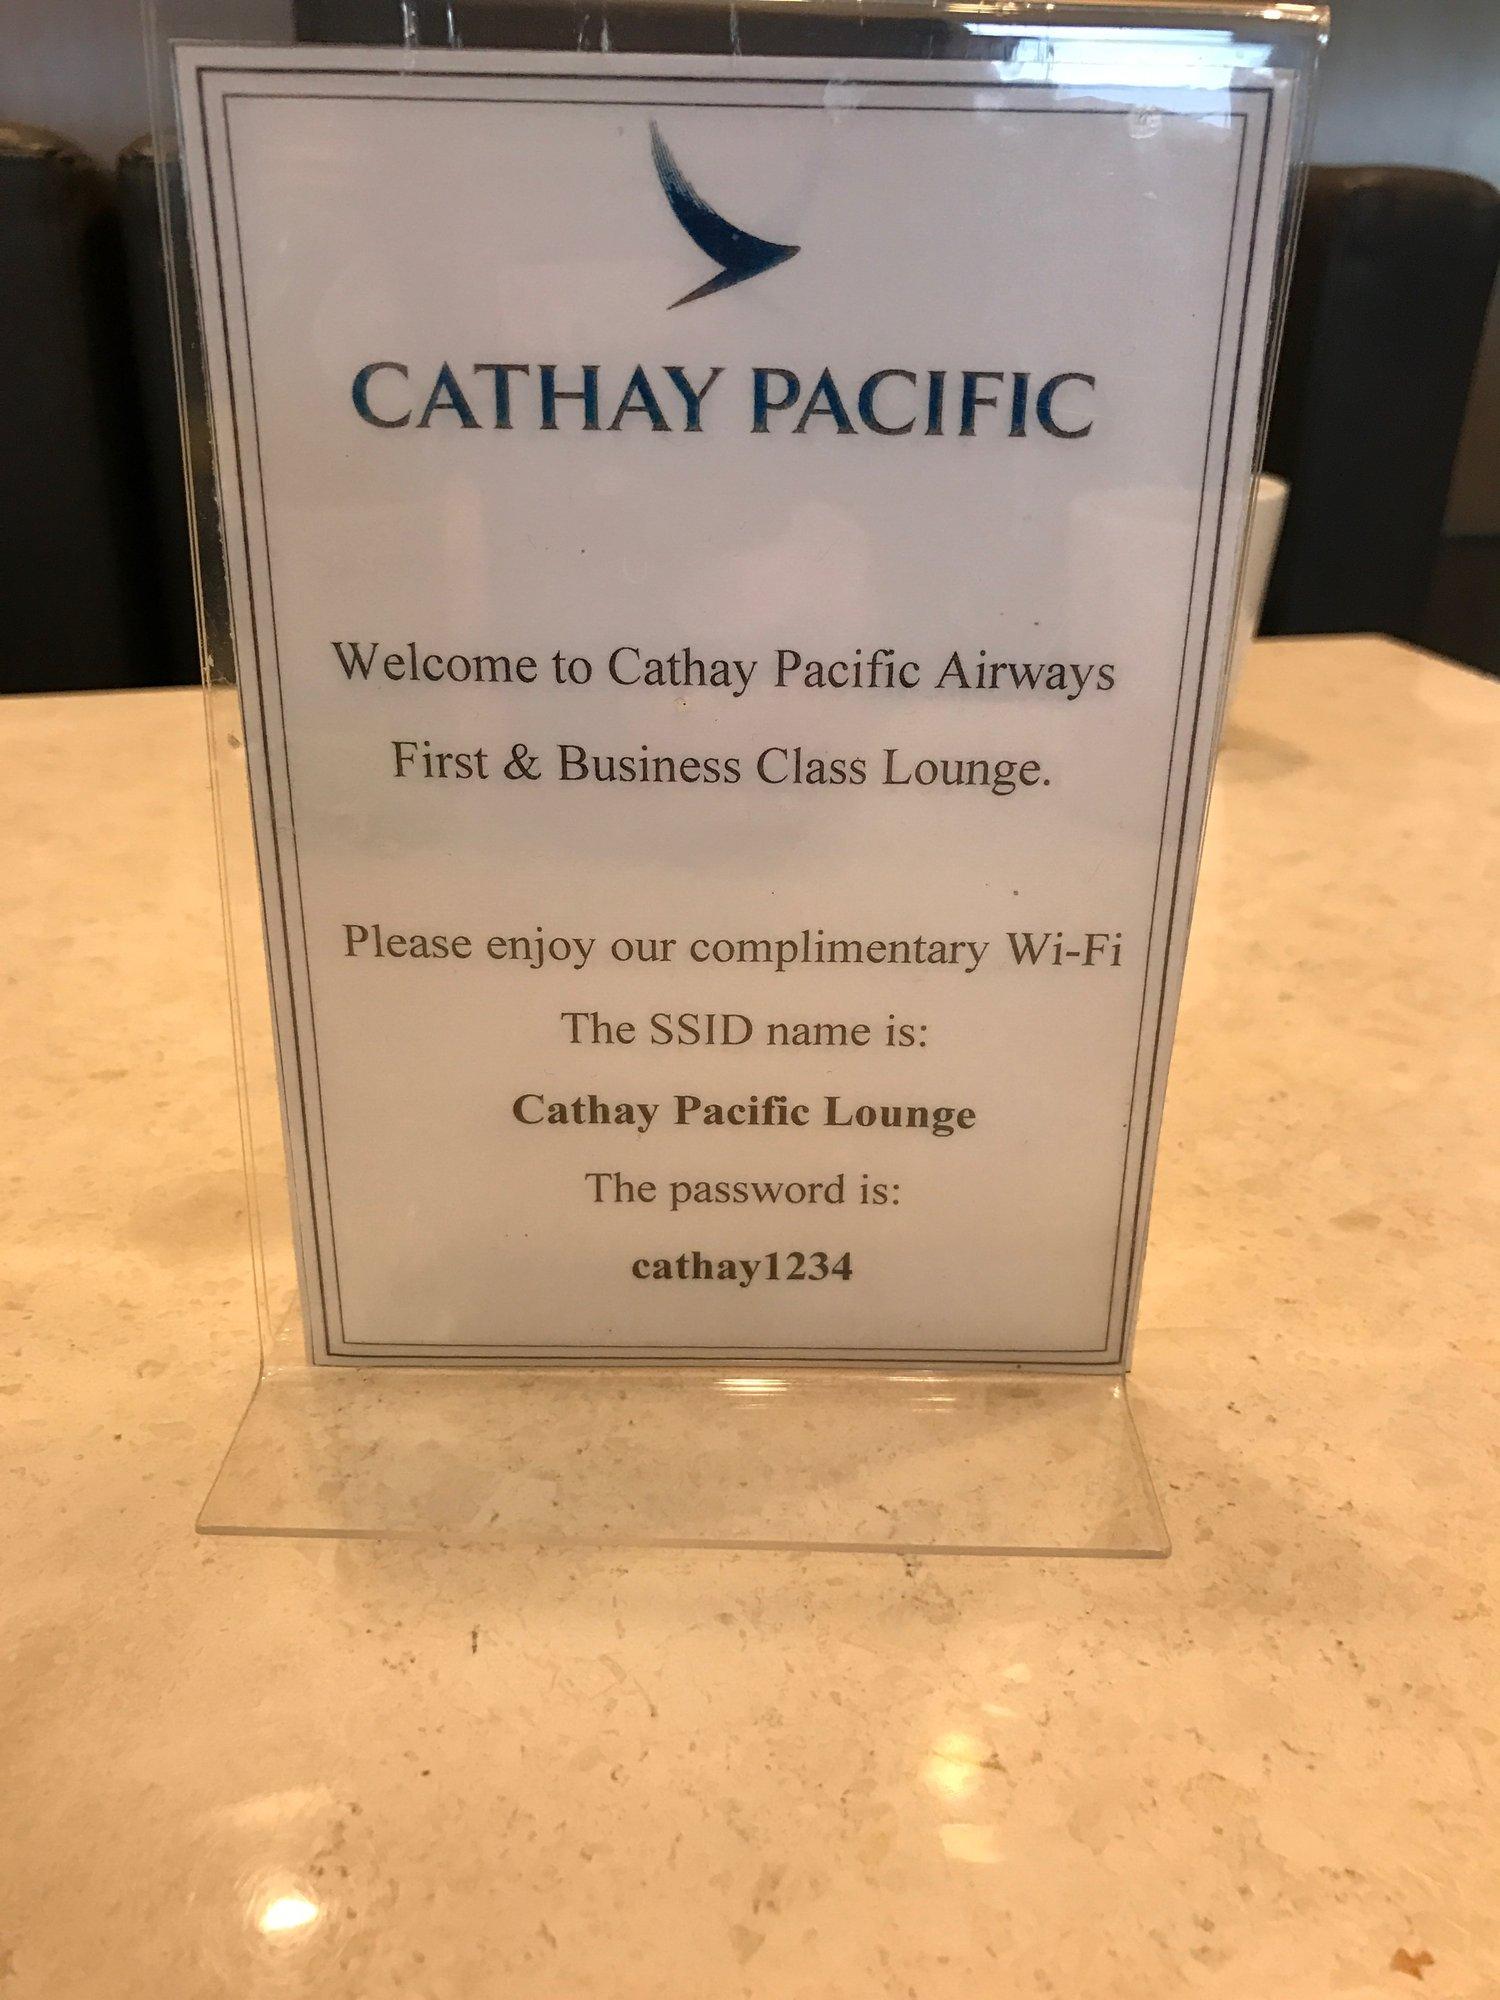 Cathay Pacific First and Business Class Lounge image 72 of 74